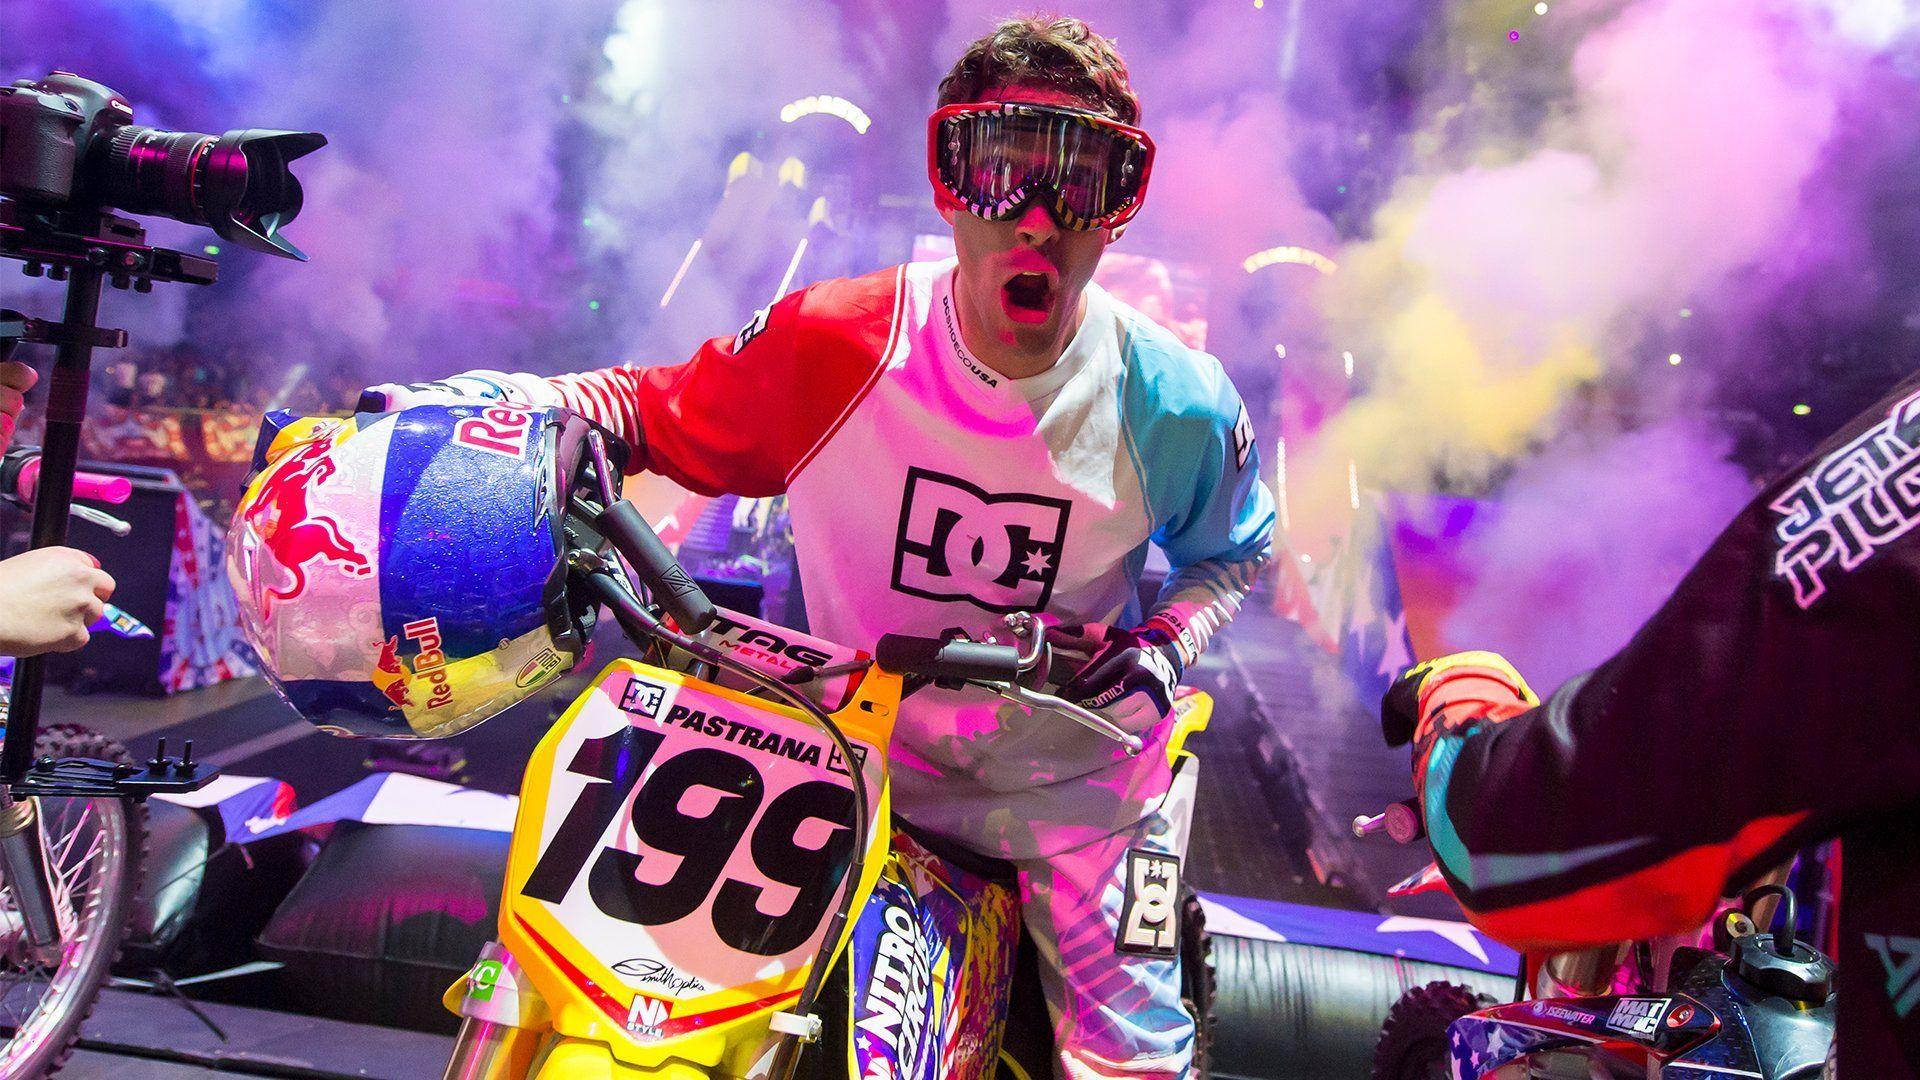 Travis Pastrana Life of the Party Desktop Wallpapers.